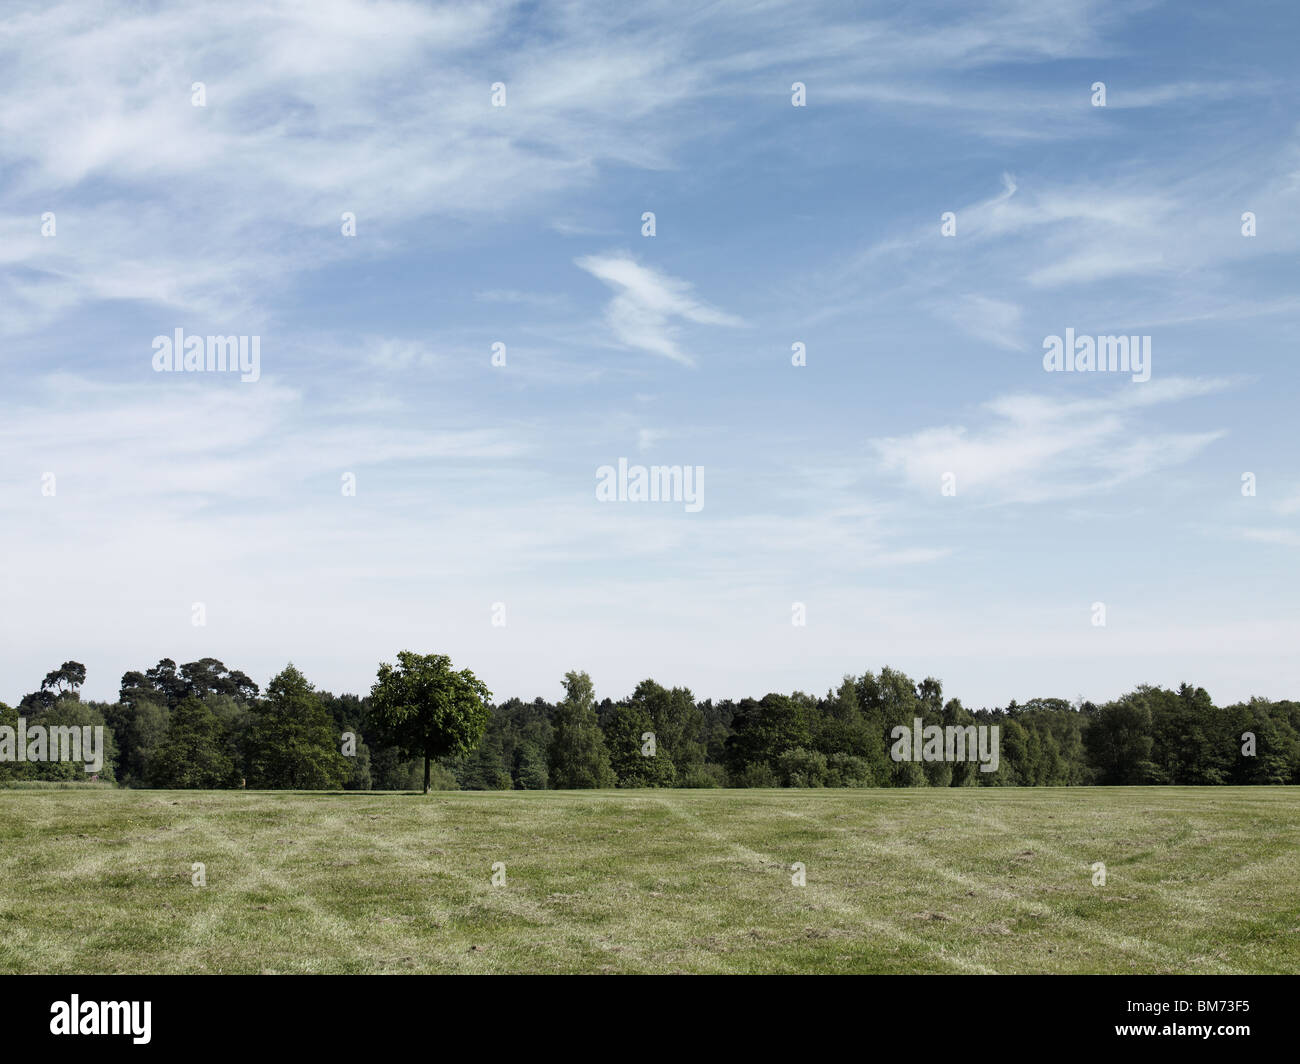 landscape image of a car park in a field, showing tire marks on grass, trees and a summer sky on a sunny day Stock Photo